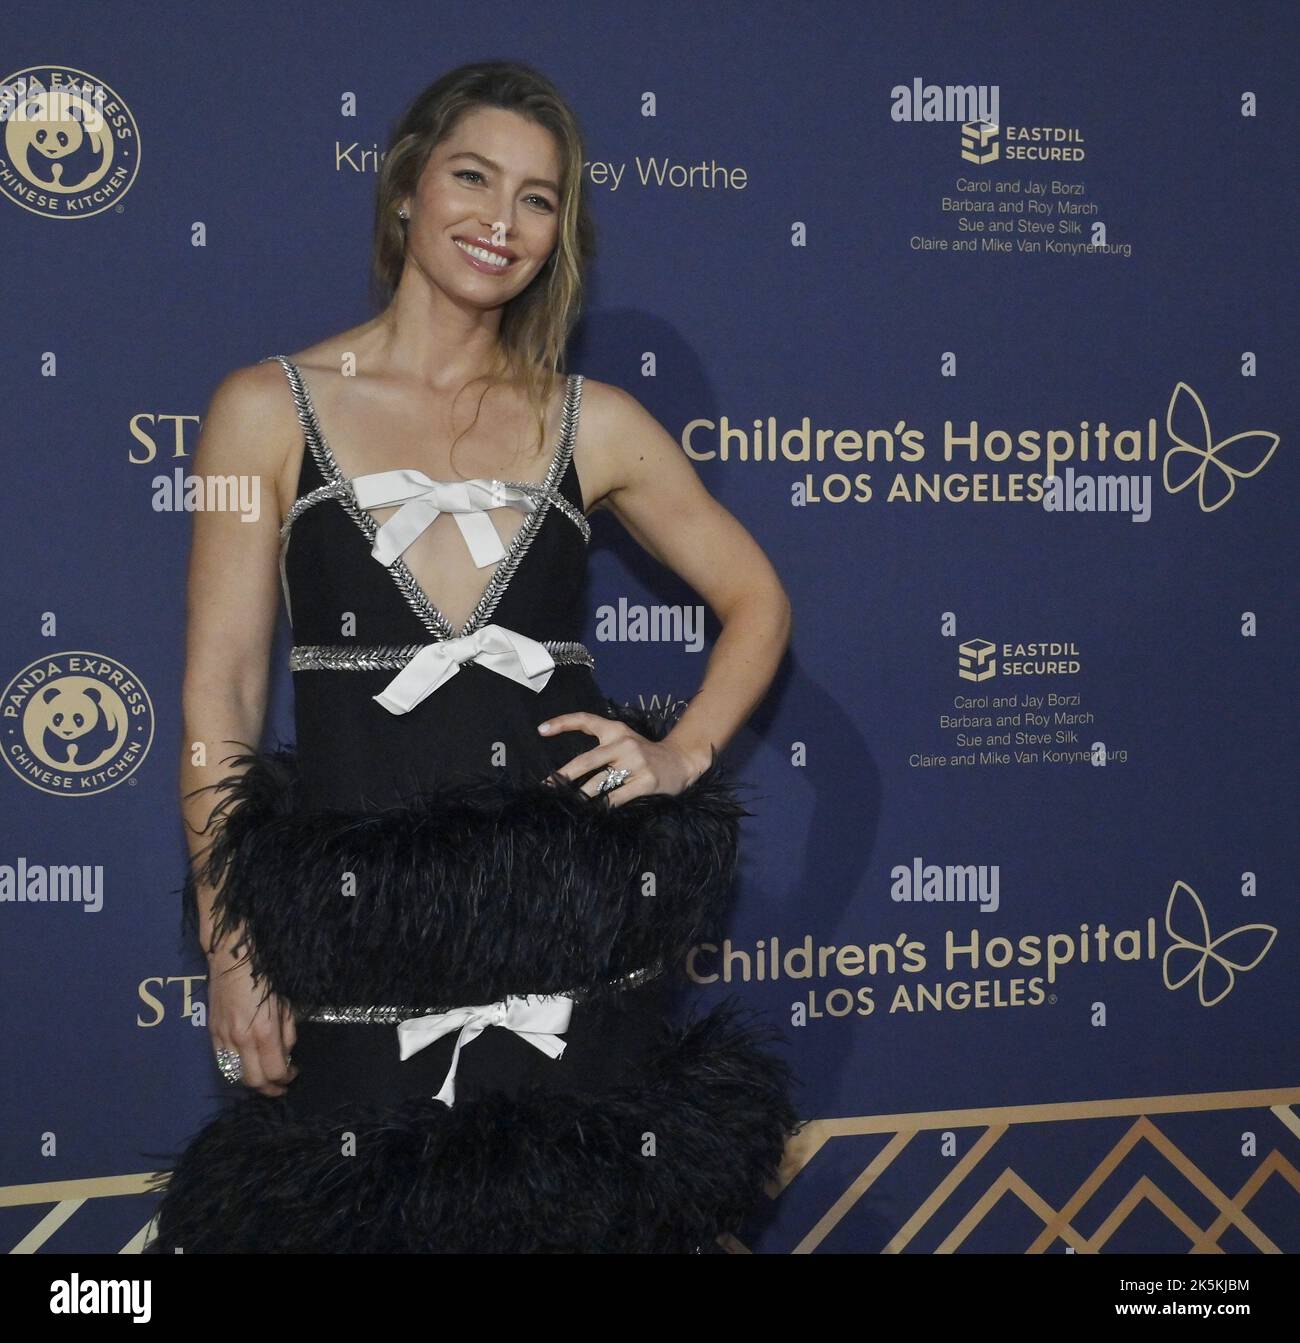 Los Angeles, United States. 08th Oct, 2022. Jessica Biel attends the Children's Hospital Los Angeles CHLA gala at Barker Hangar in Santa Monica, California on Saturday, October 8, 2022. Hosted by actor Chris Pine and his father, actor Robert Pine, the evening featured a live performance by Timberlake and paid tribute to the hospital's frontline clinical team members and philanthropists who help CHLA fulfill its mission of creating hope and building healthier futures for children. Photo by Jim Ruymen/UPI Credit: UPI/Alamy Live News Stock Photo